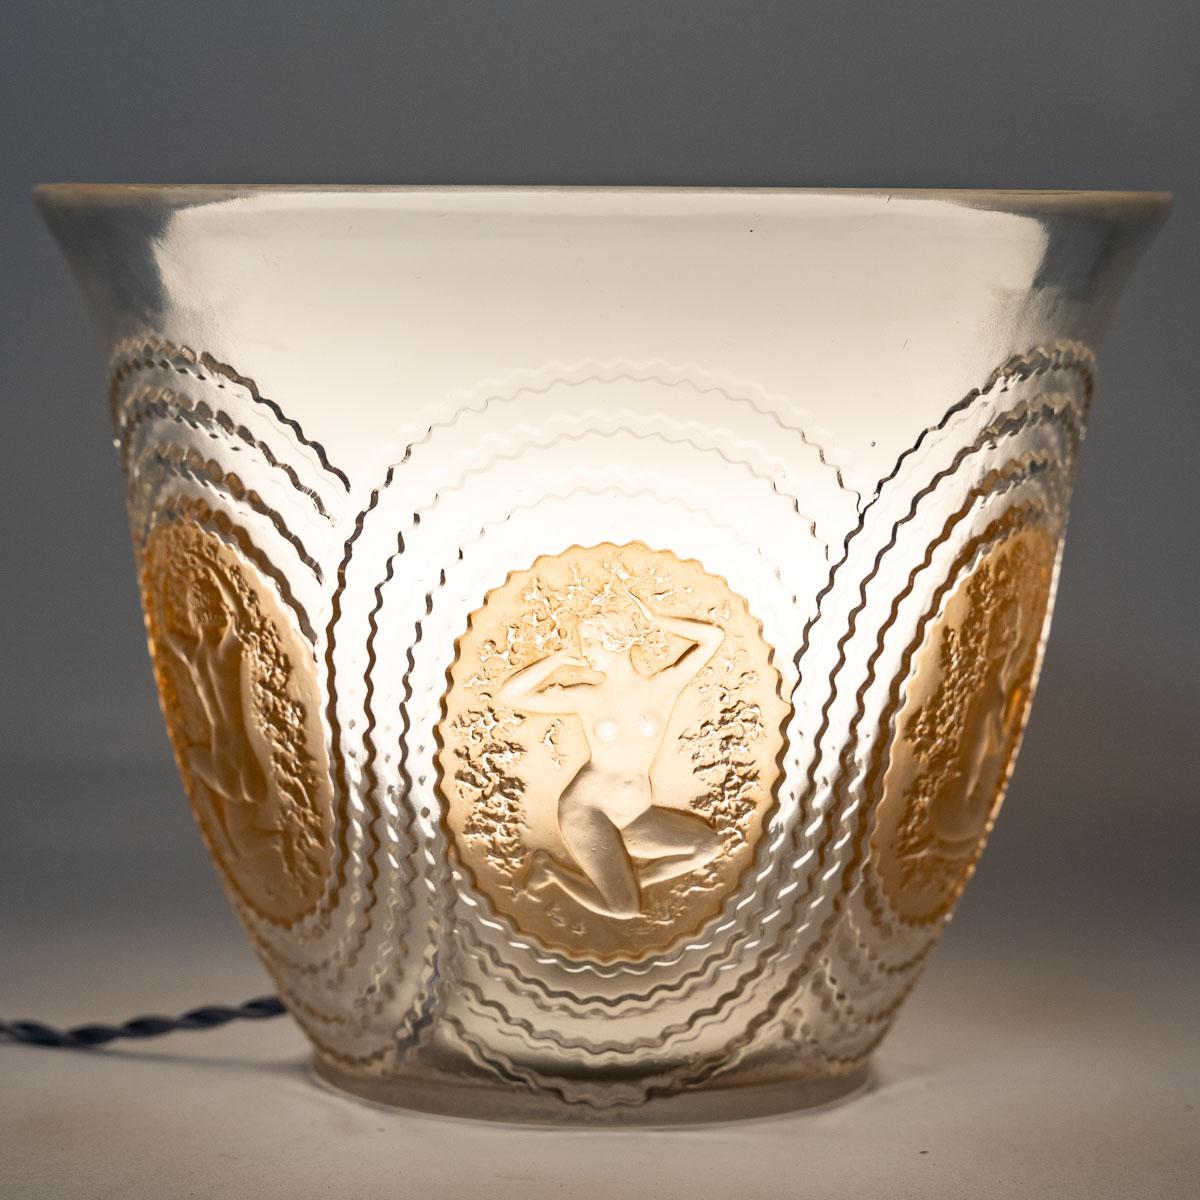 Molded 1937 Rene Lalique, Table Lamp Reflector Vase Driades Frosted Glass Sepia Patina